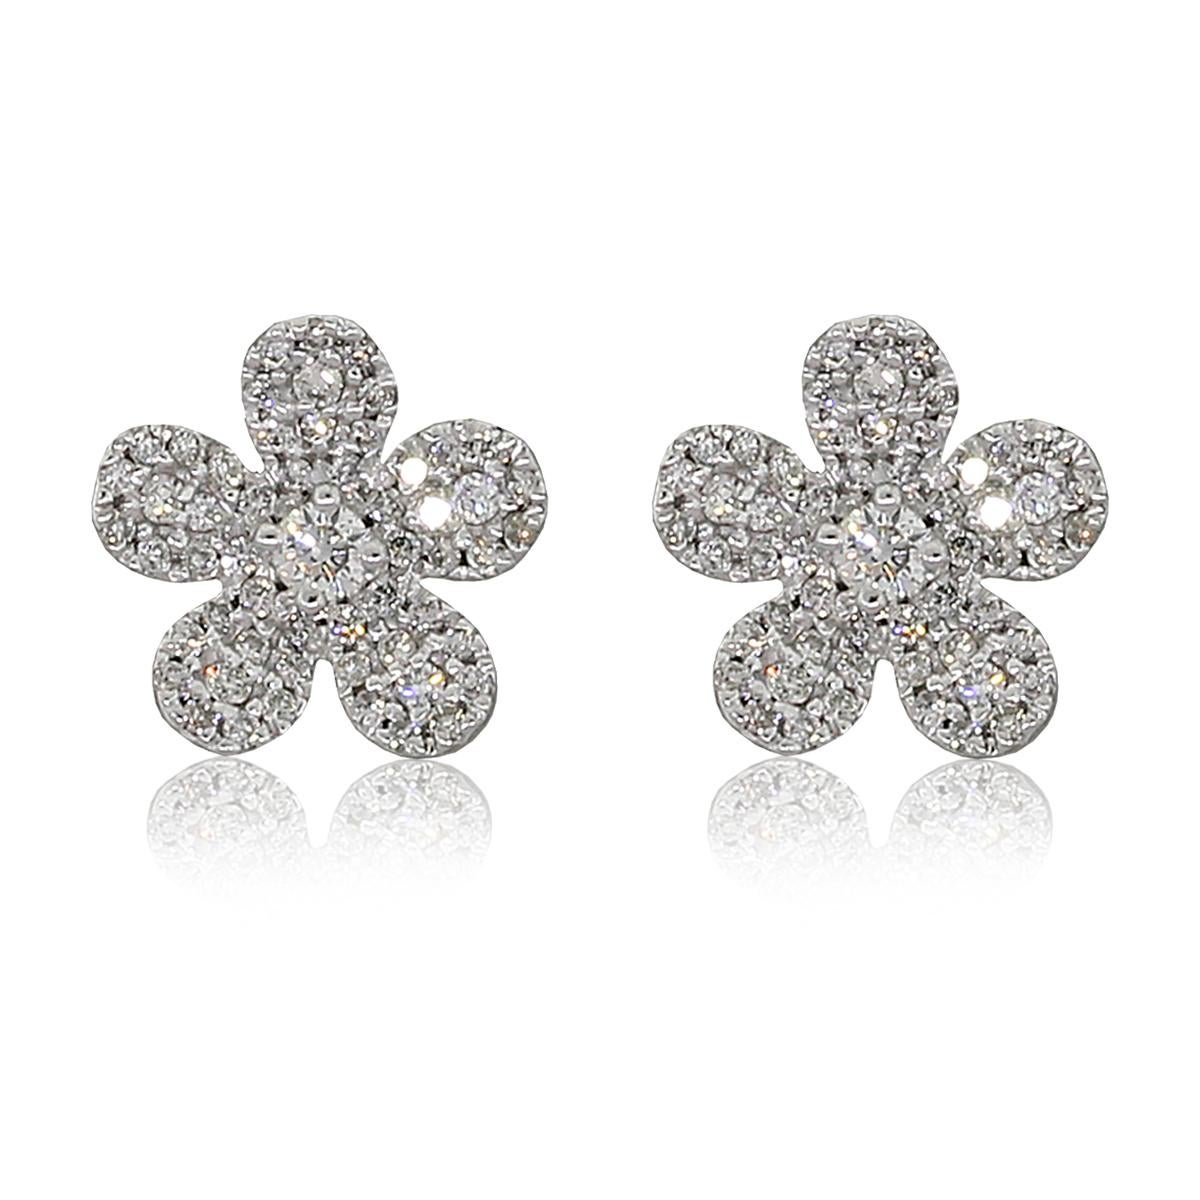 Material: 14k white gold
Diamond Details: Approximately 0.35ctw round brilliant cut diamonds. Diamonds are I/J in color and SI3 in clarity.
Measurements: 0.52″ x 0.34″ x 0.35″
Earring Backs: Post friction
Item Weight: 2.03g (1.3dwt)
Additional